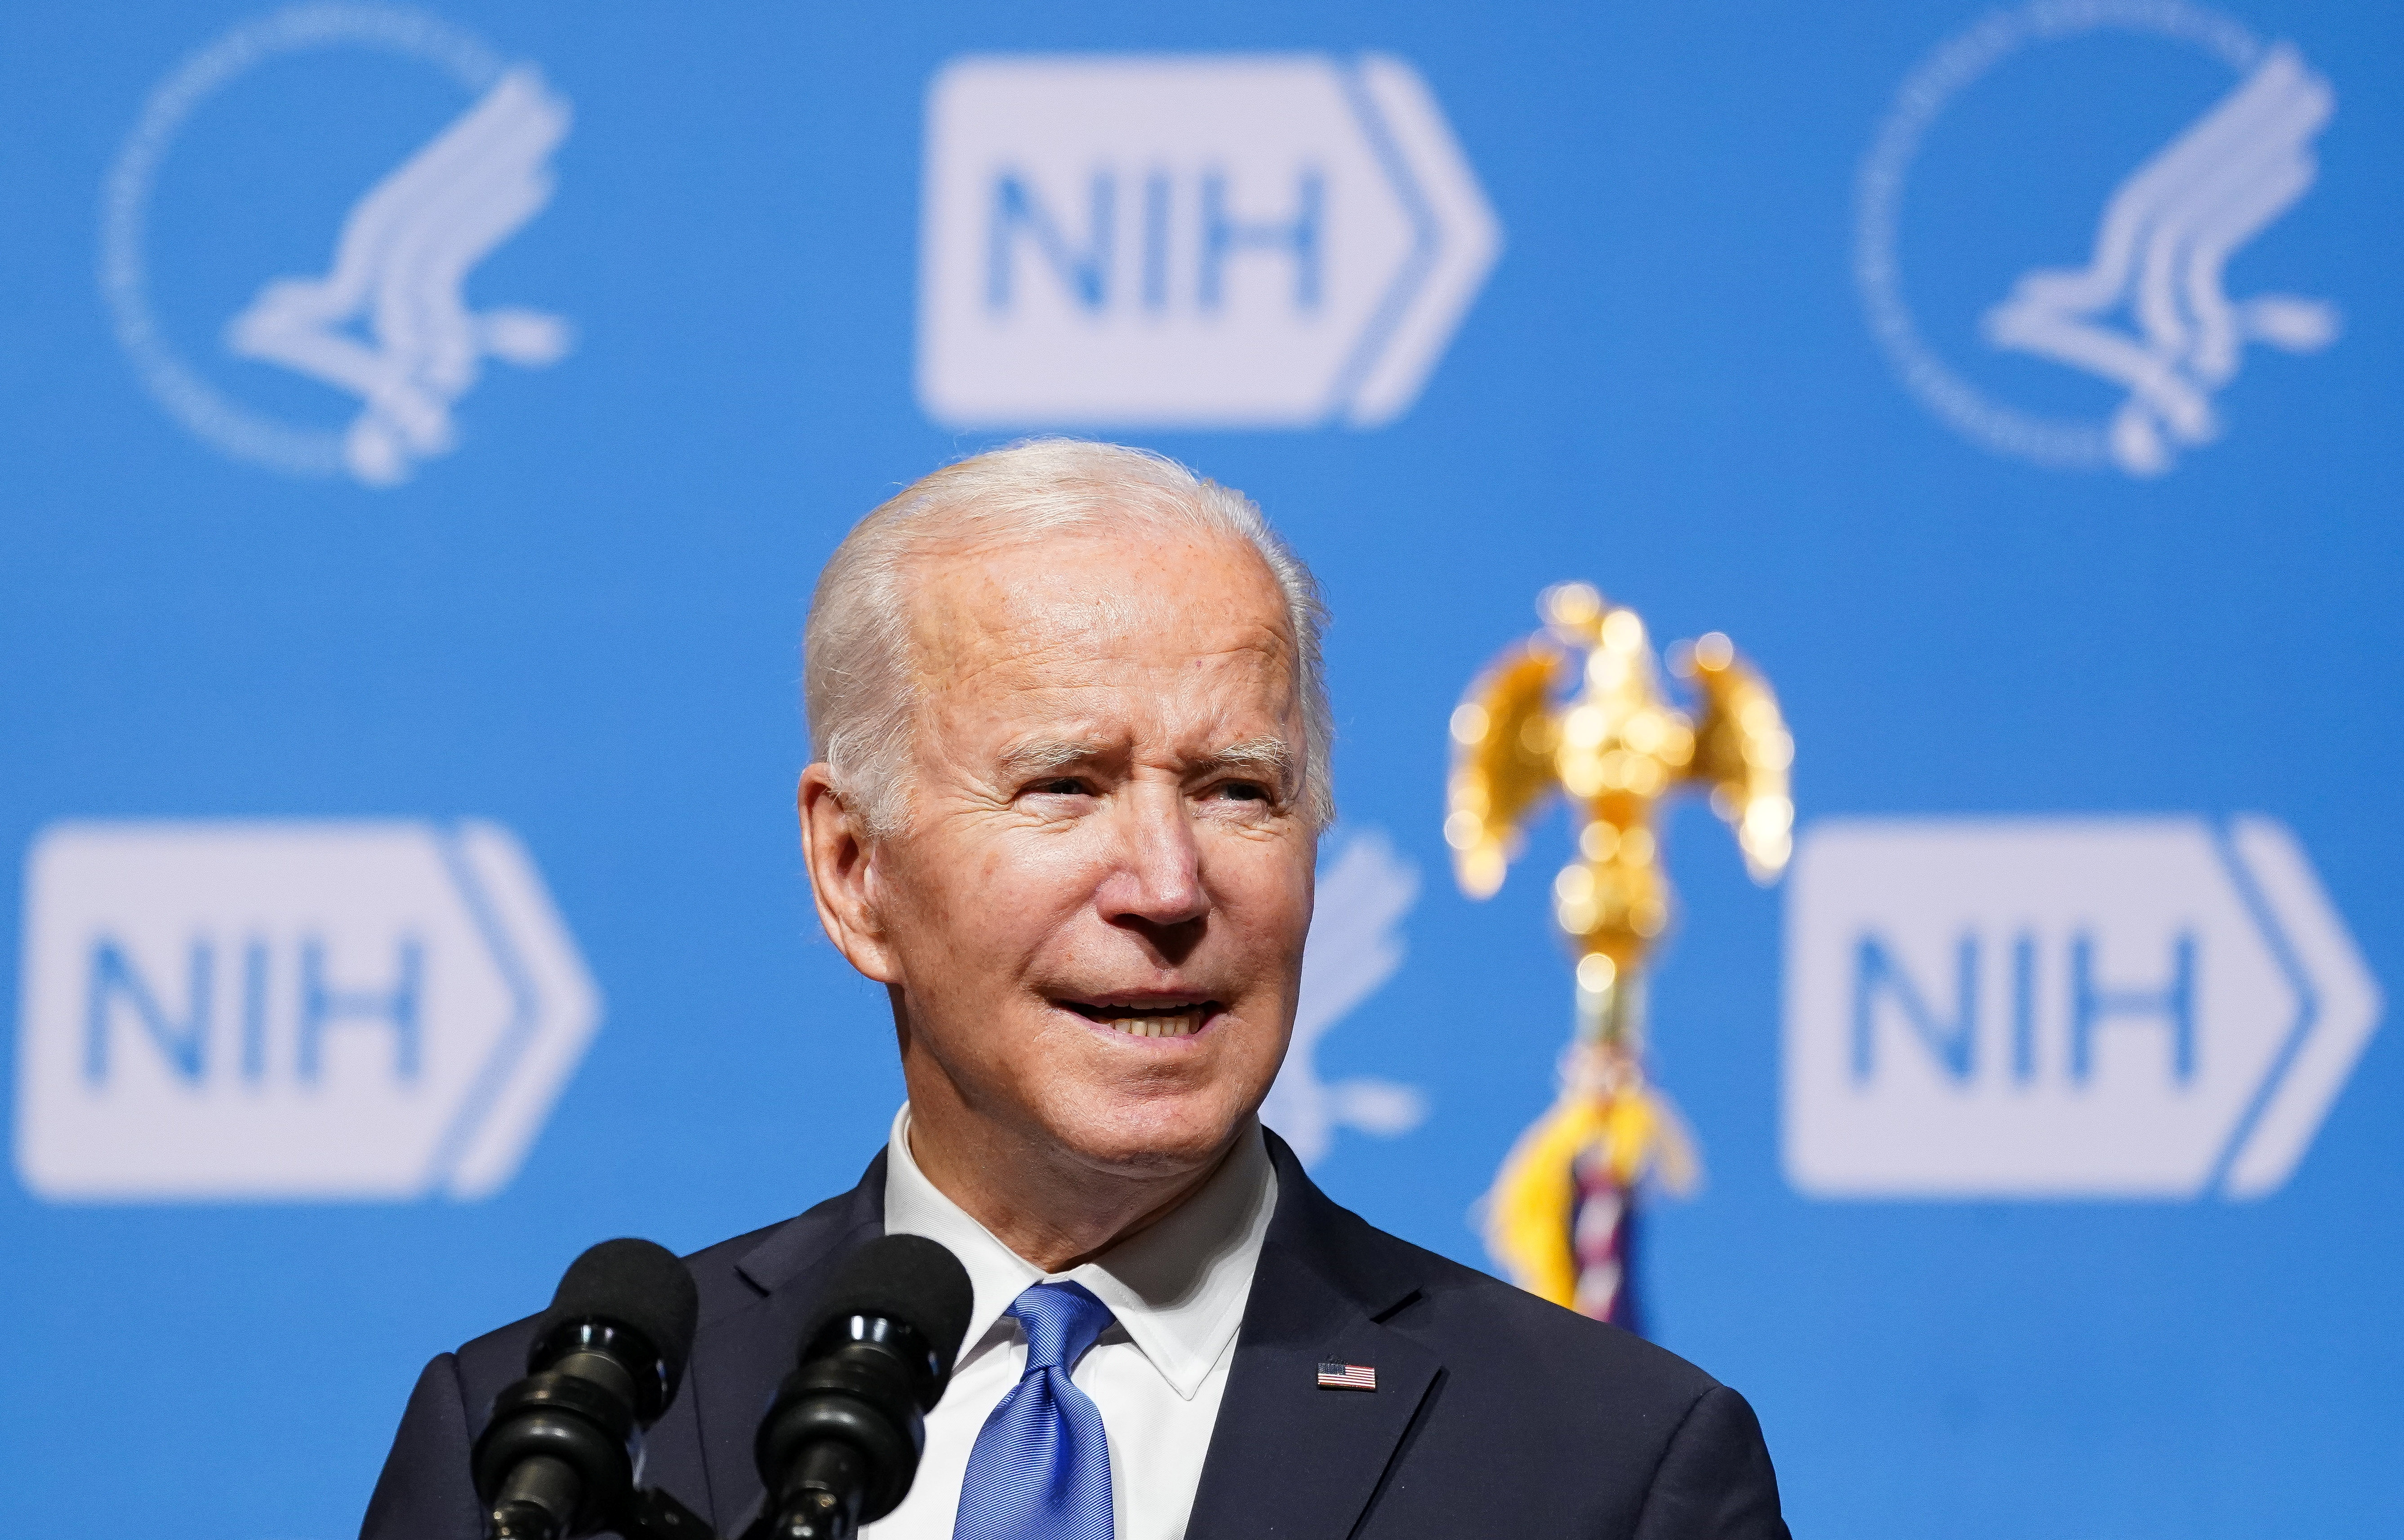 U.S. President Joe Biden speaks about his administration's plan to fight the coronavirus disease (COVID-19) with the emergence of the Omicron variant, during his visit to the National Institutes of Health, in Bethesda, Maryland, U.S., December 2, 2021. REUTERS/Kevin Lamarque